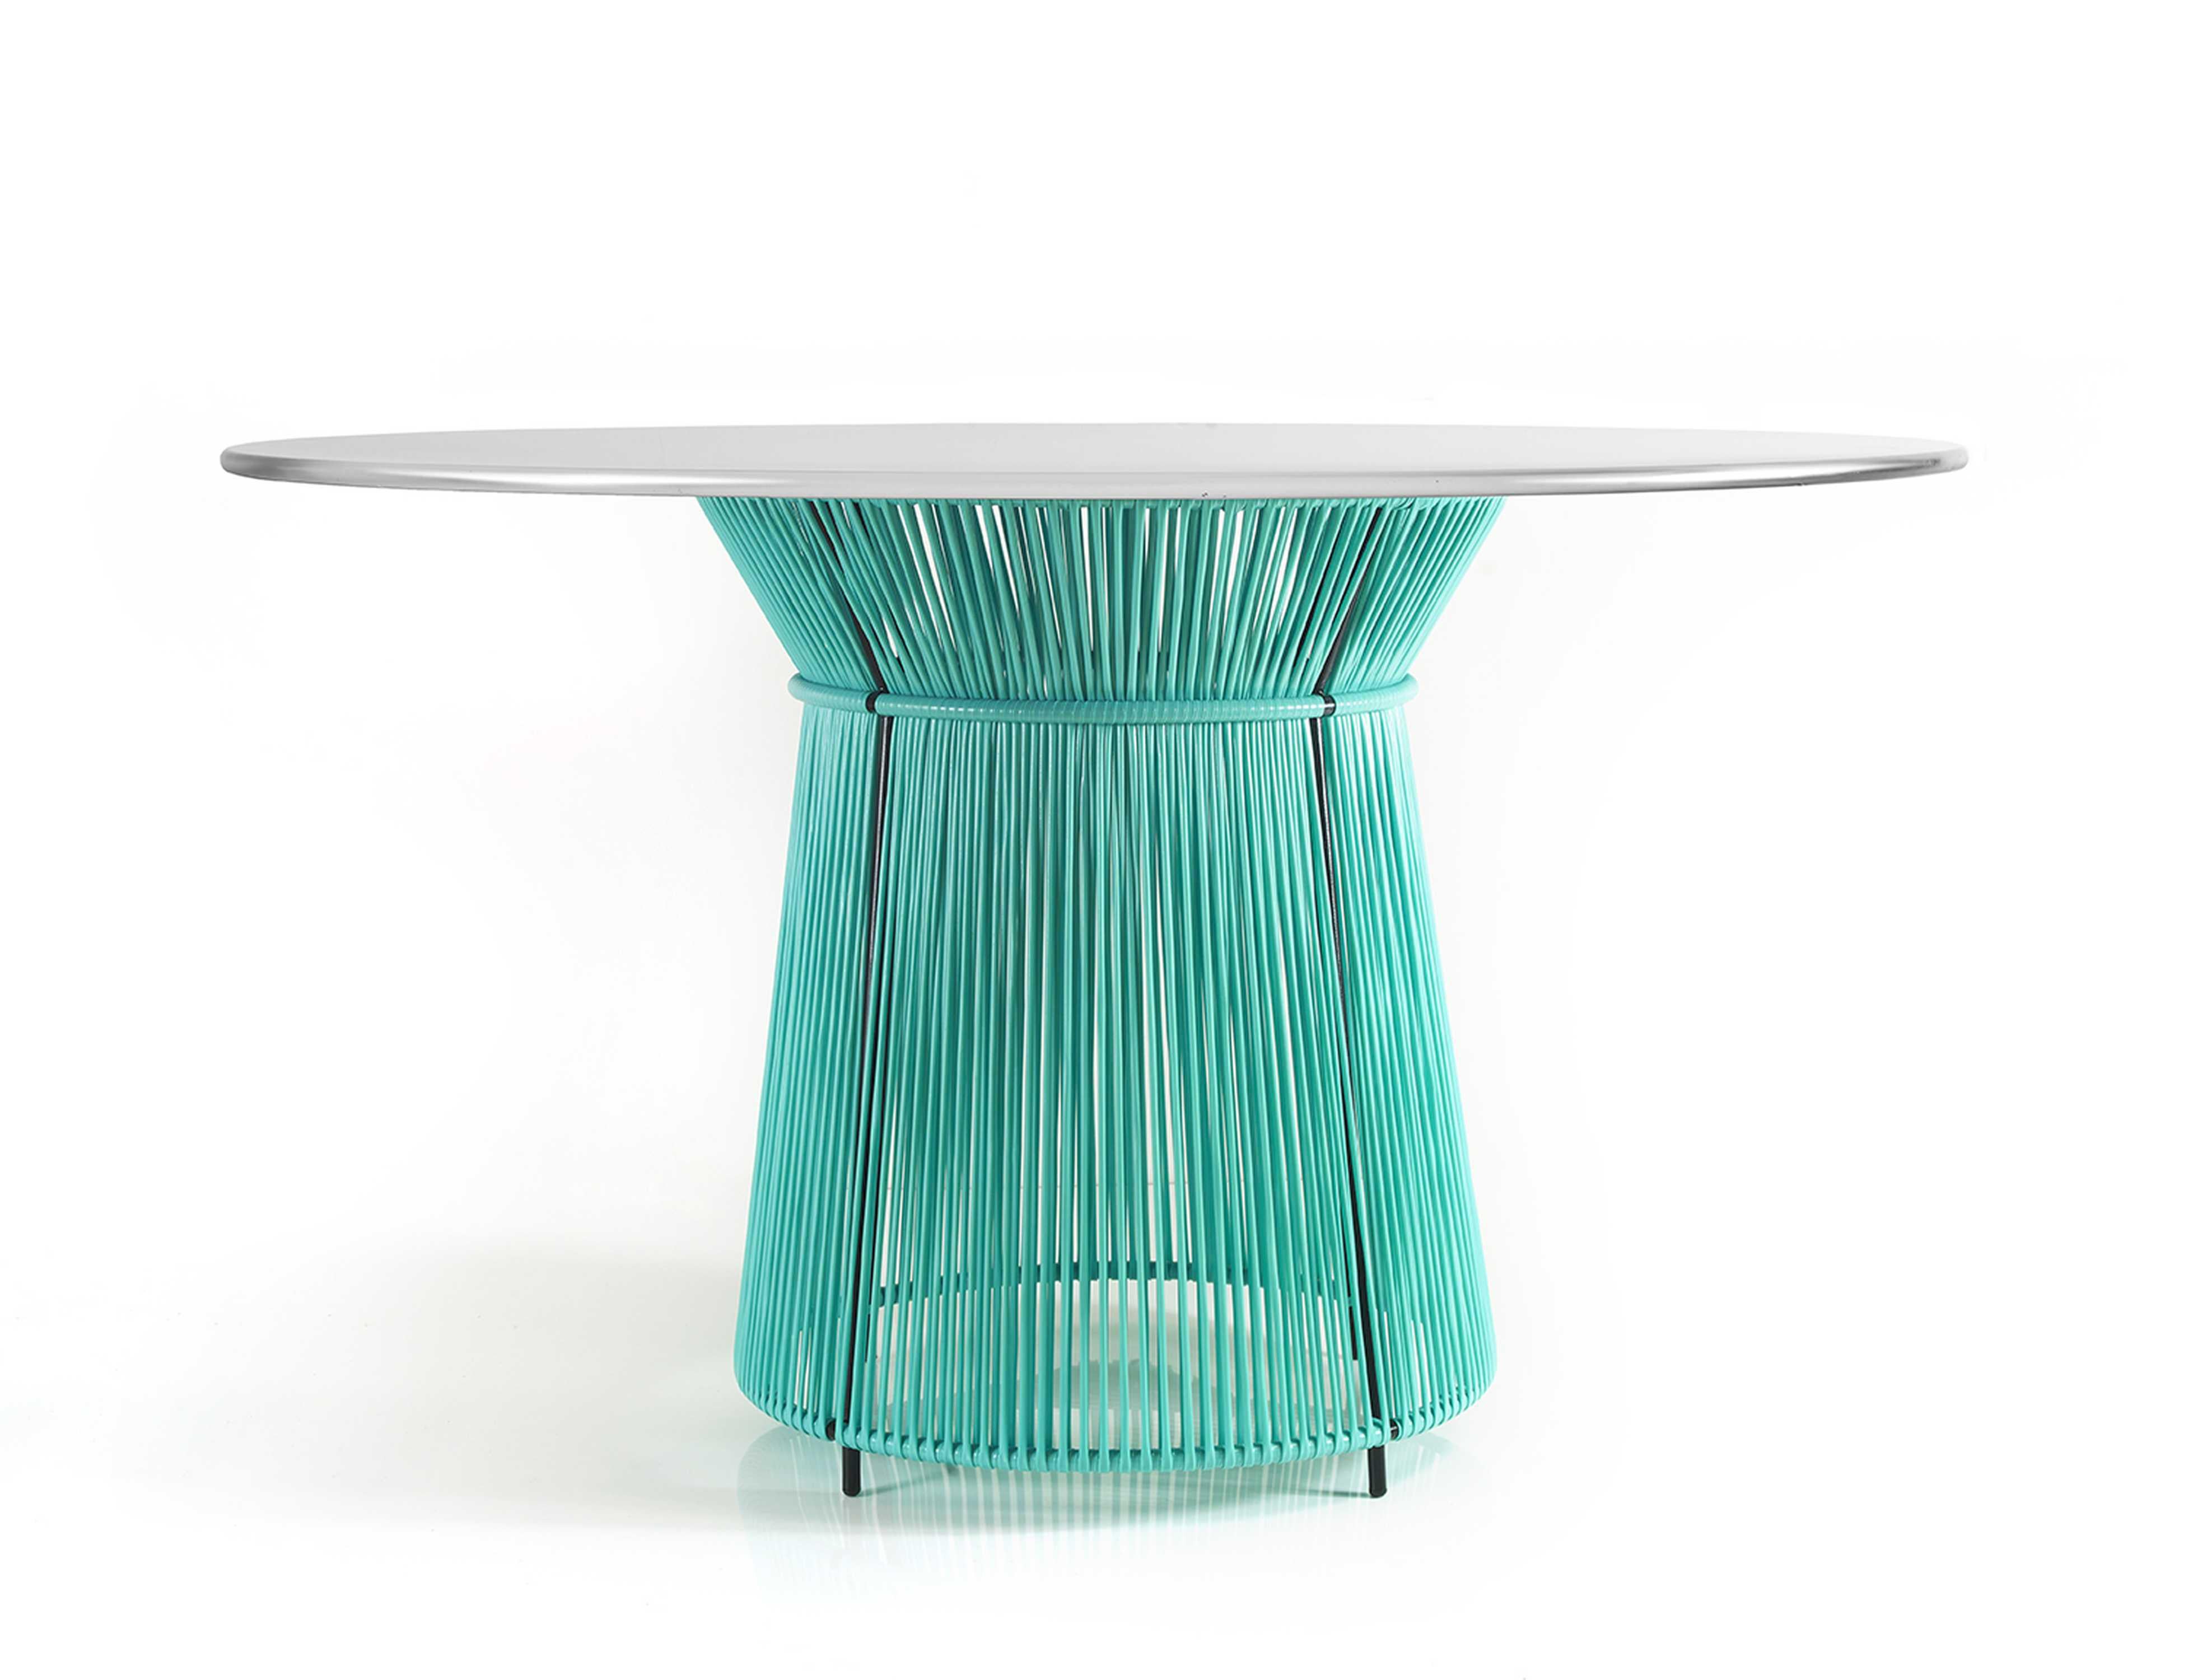 Mint Caribe dining table by Sebastian Herkner
Materials: Galvanized and powder-coated tubular steel. PVC strings are made from recycled plastic.
Technique: Made from recycled plastic and weaved by local craftspeople in Colombia. 
Dimensions: 
Top